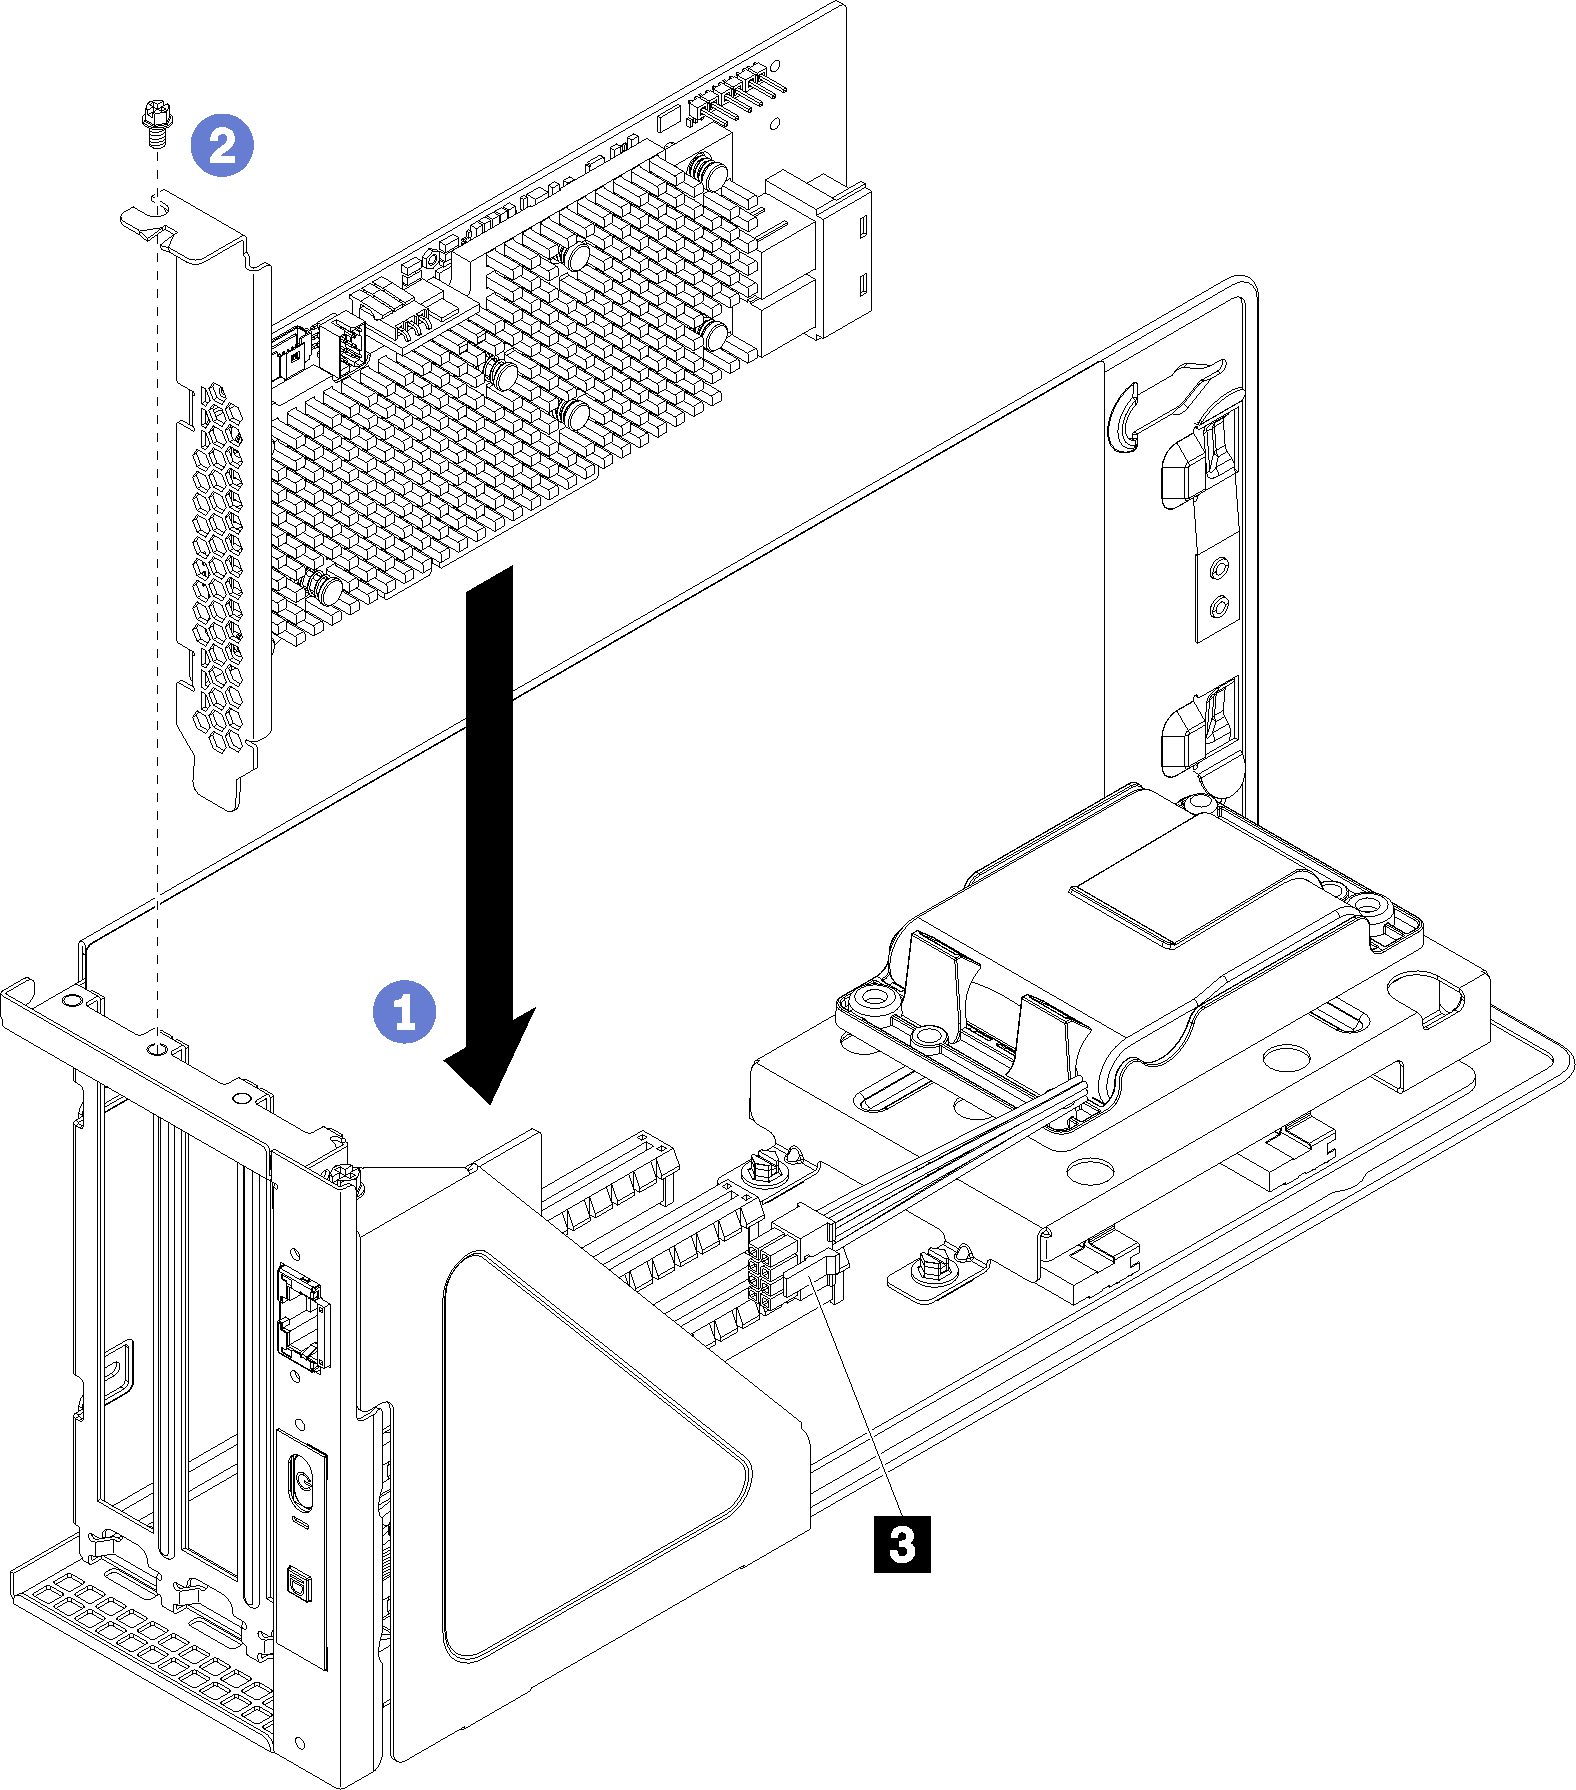 Removing a PCIe adapter from the I/O expansion cage